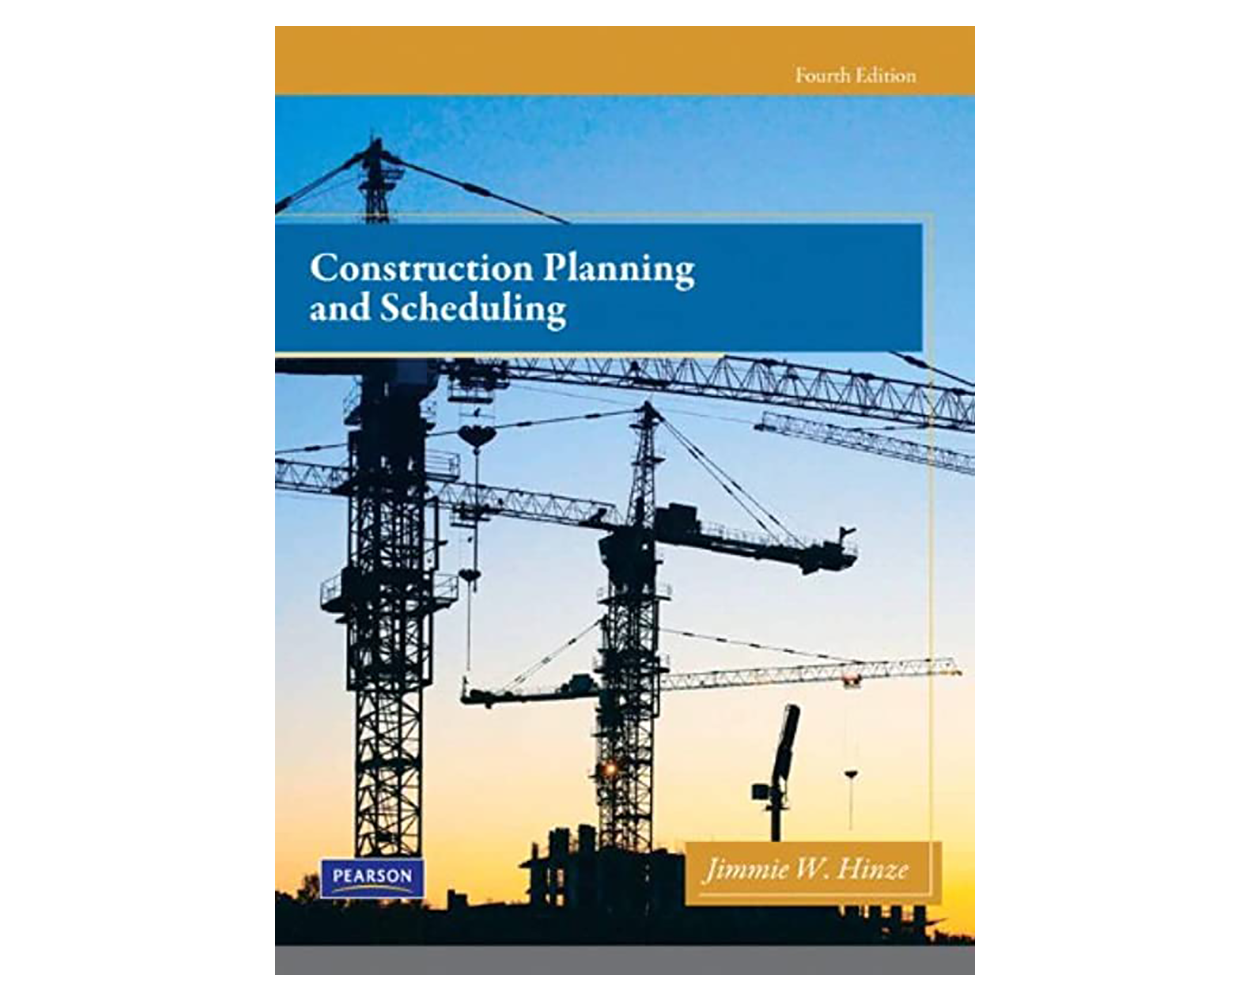 Construction Contracts: Jimmie Hinze: 9789351340058: : Books